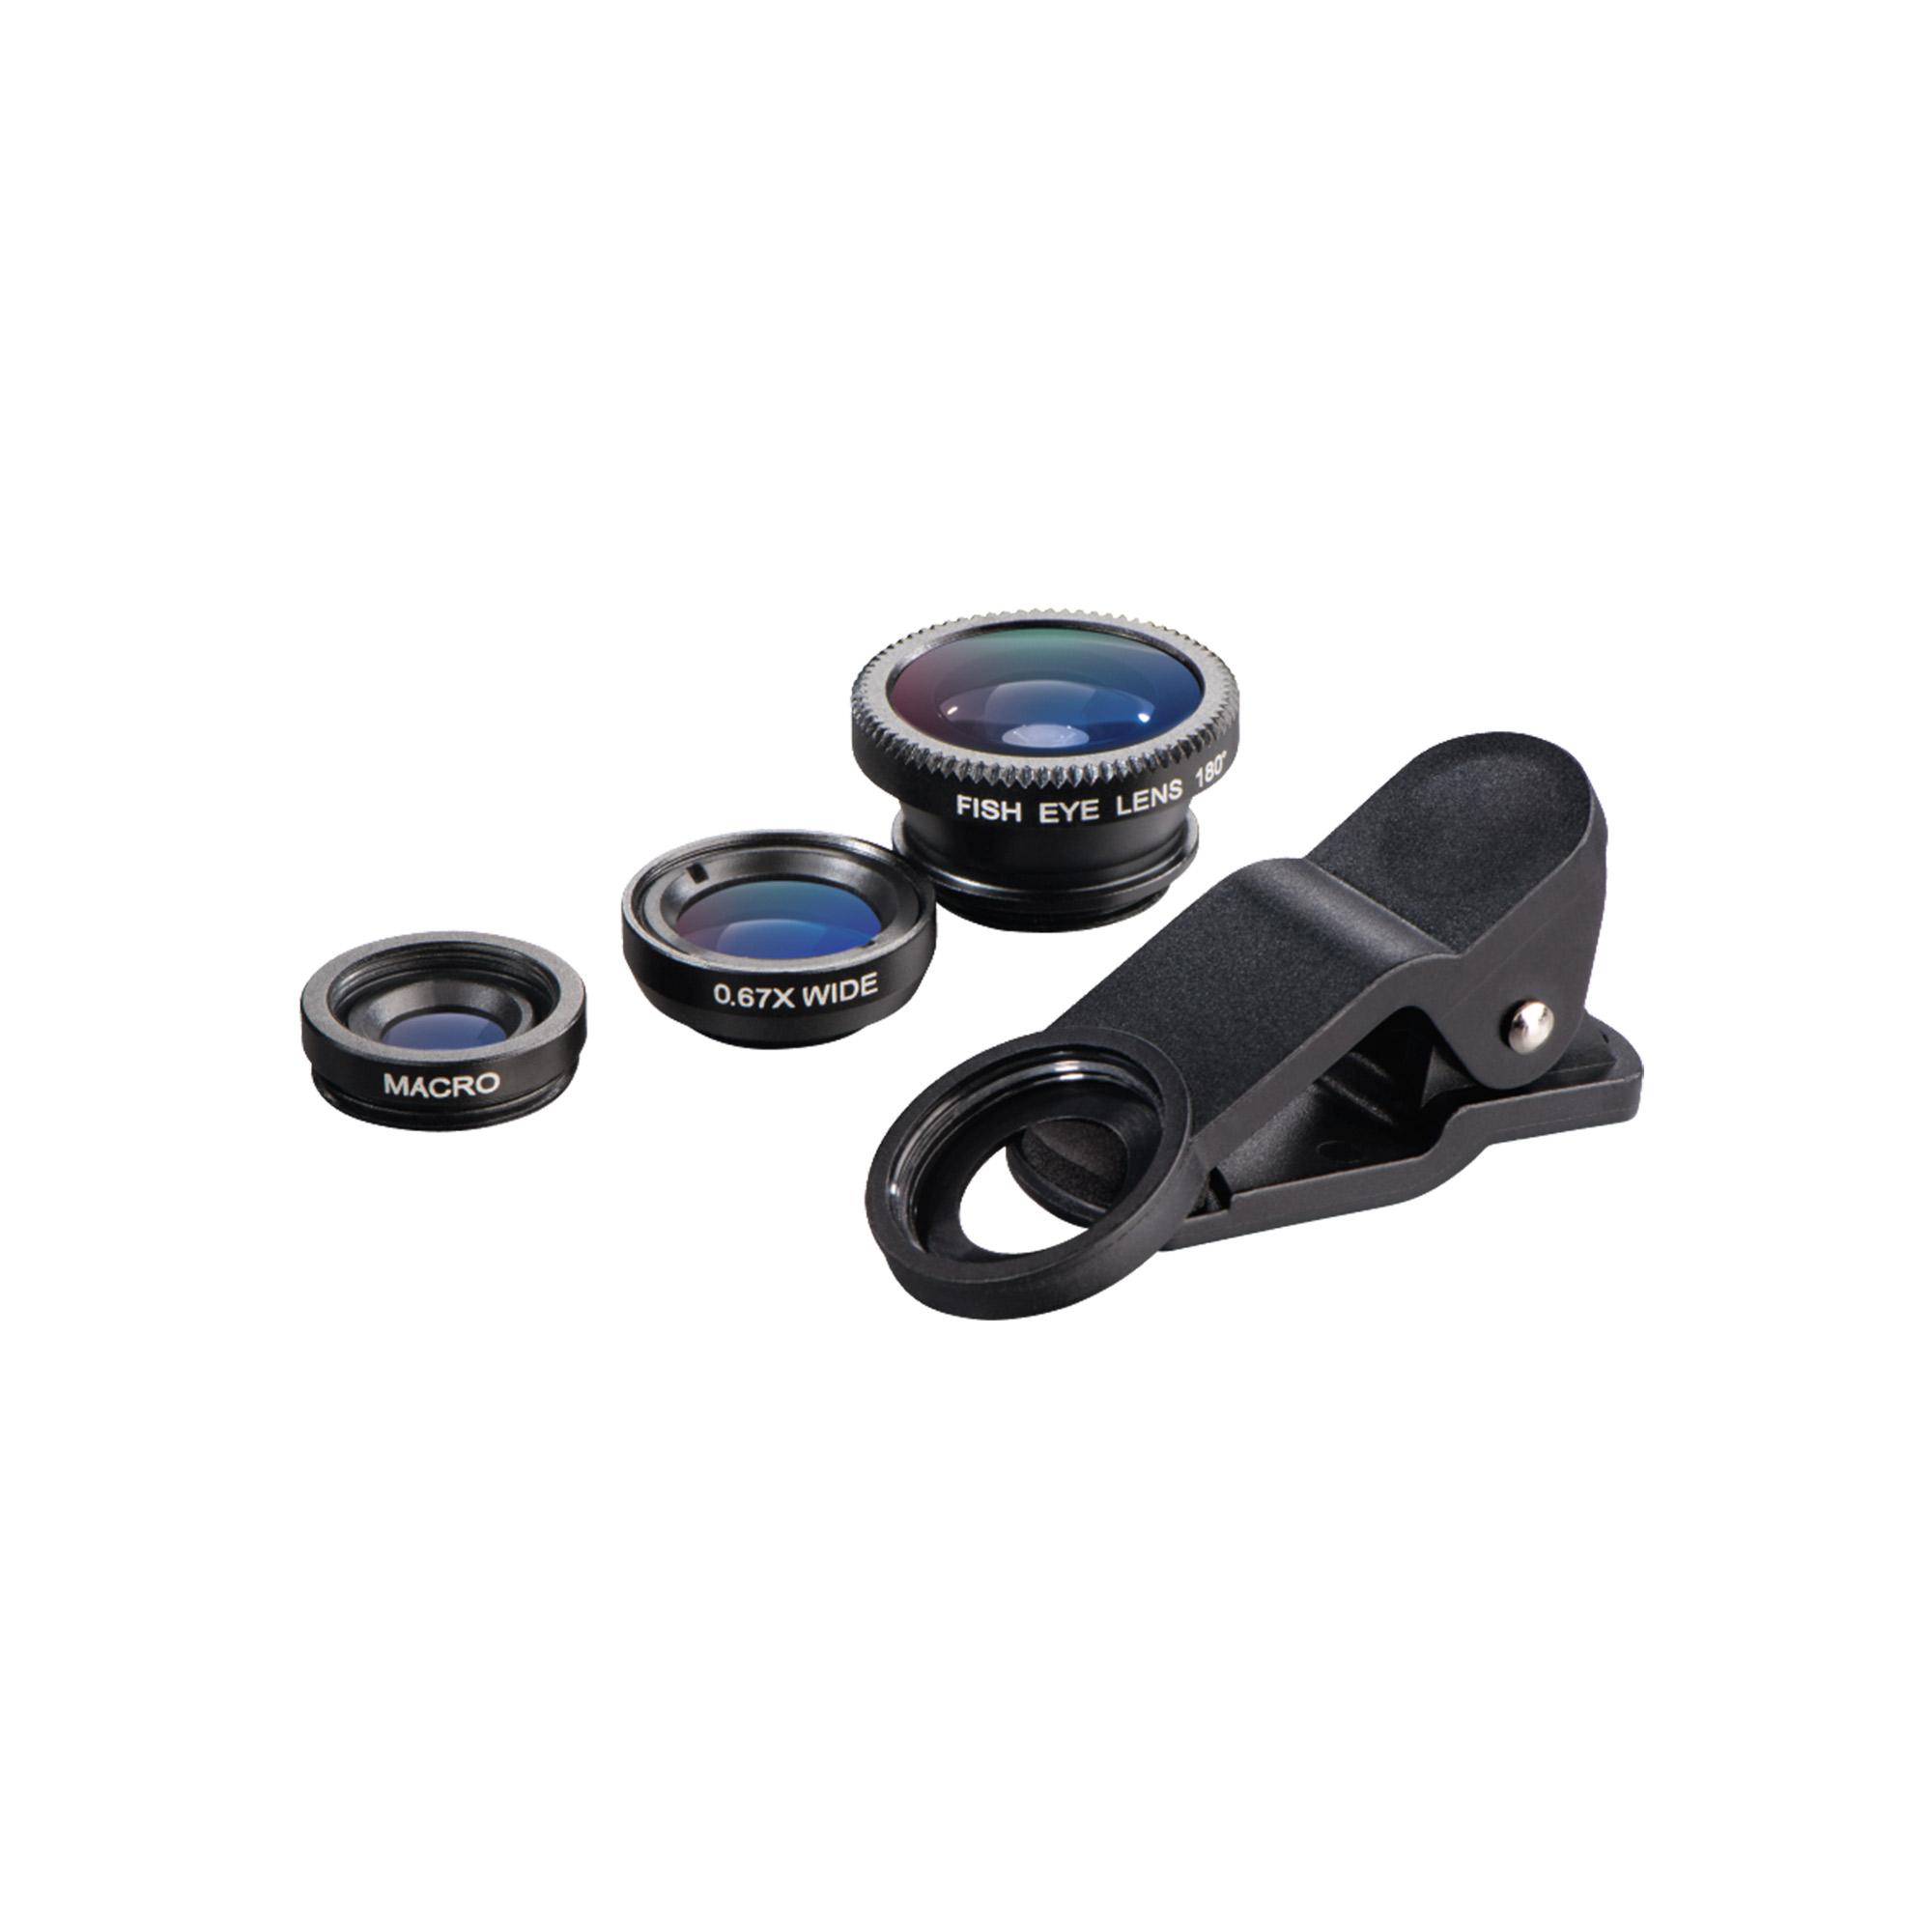 3-in-1 Lens Kit for Smartphones and Tablets - Fish-eye, Wide-angle and Macro clip on lenses